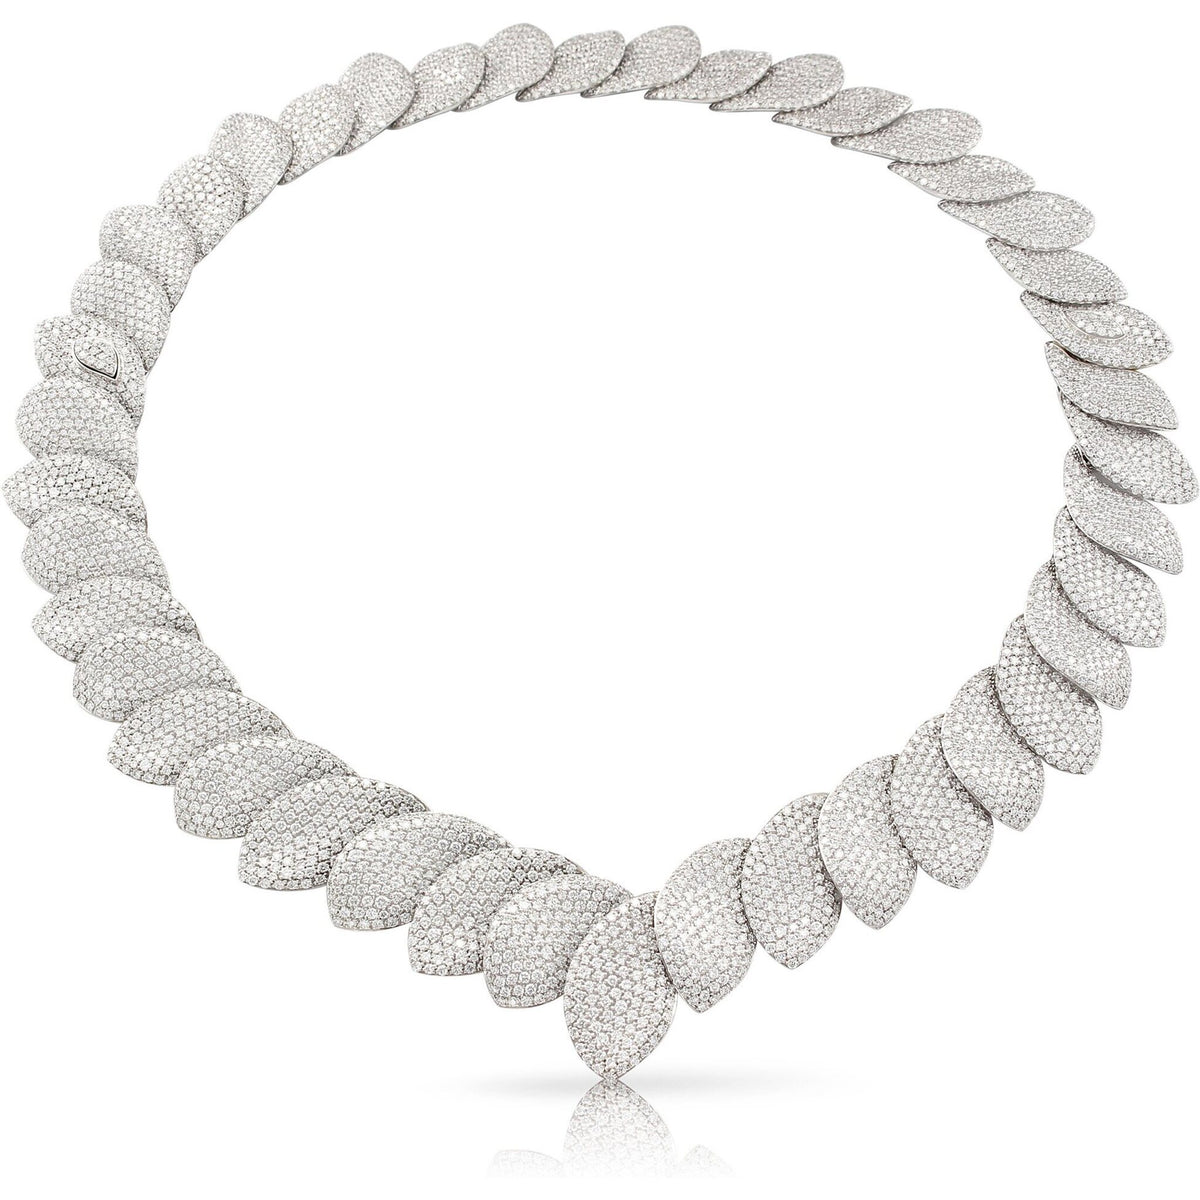 Pasquale Bruni - Aleluiá Collier combination in 18k White Gold with White Diamonds